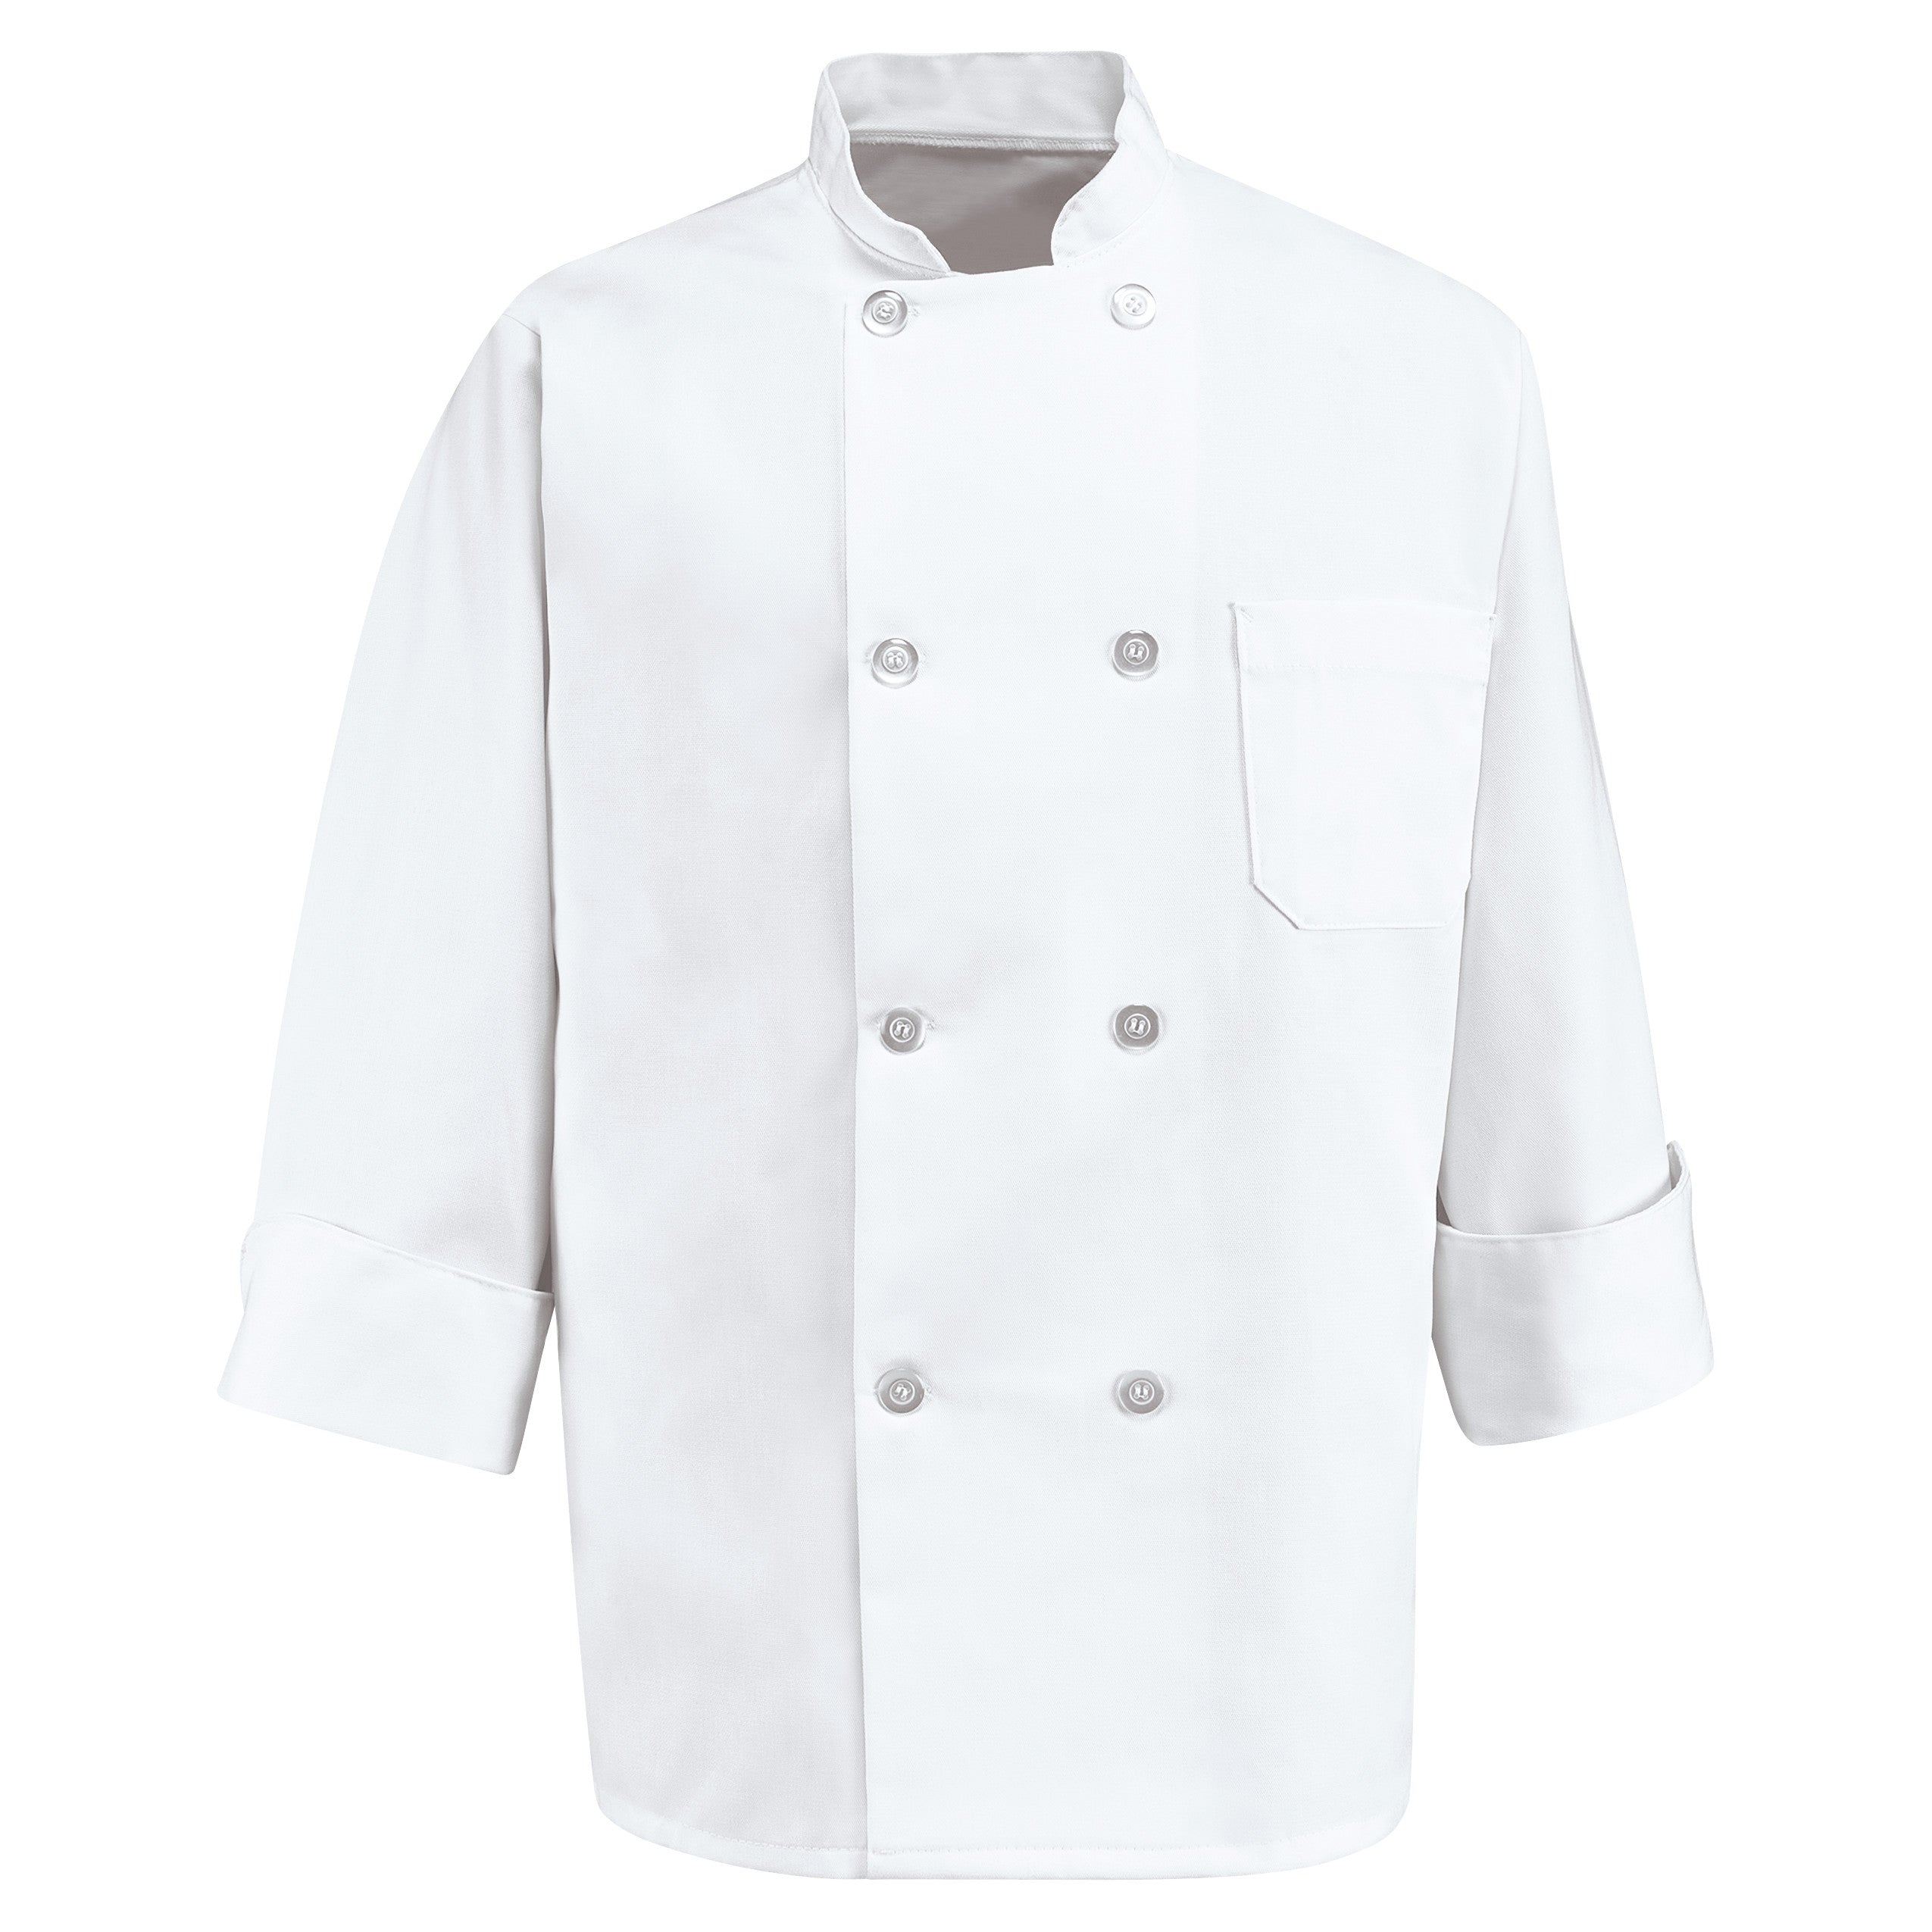 Eight Pearl Button Chef Coat 0403 - White-eSafety Supplies, Inc